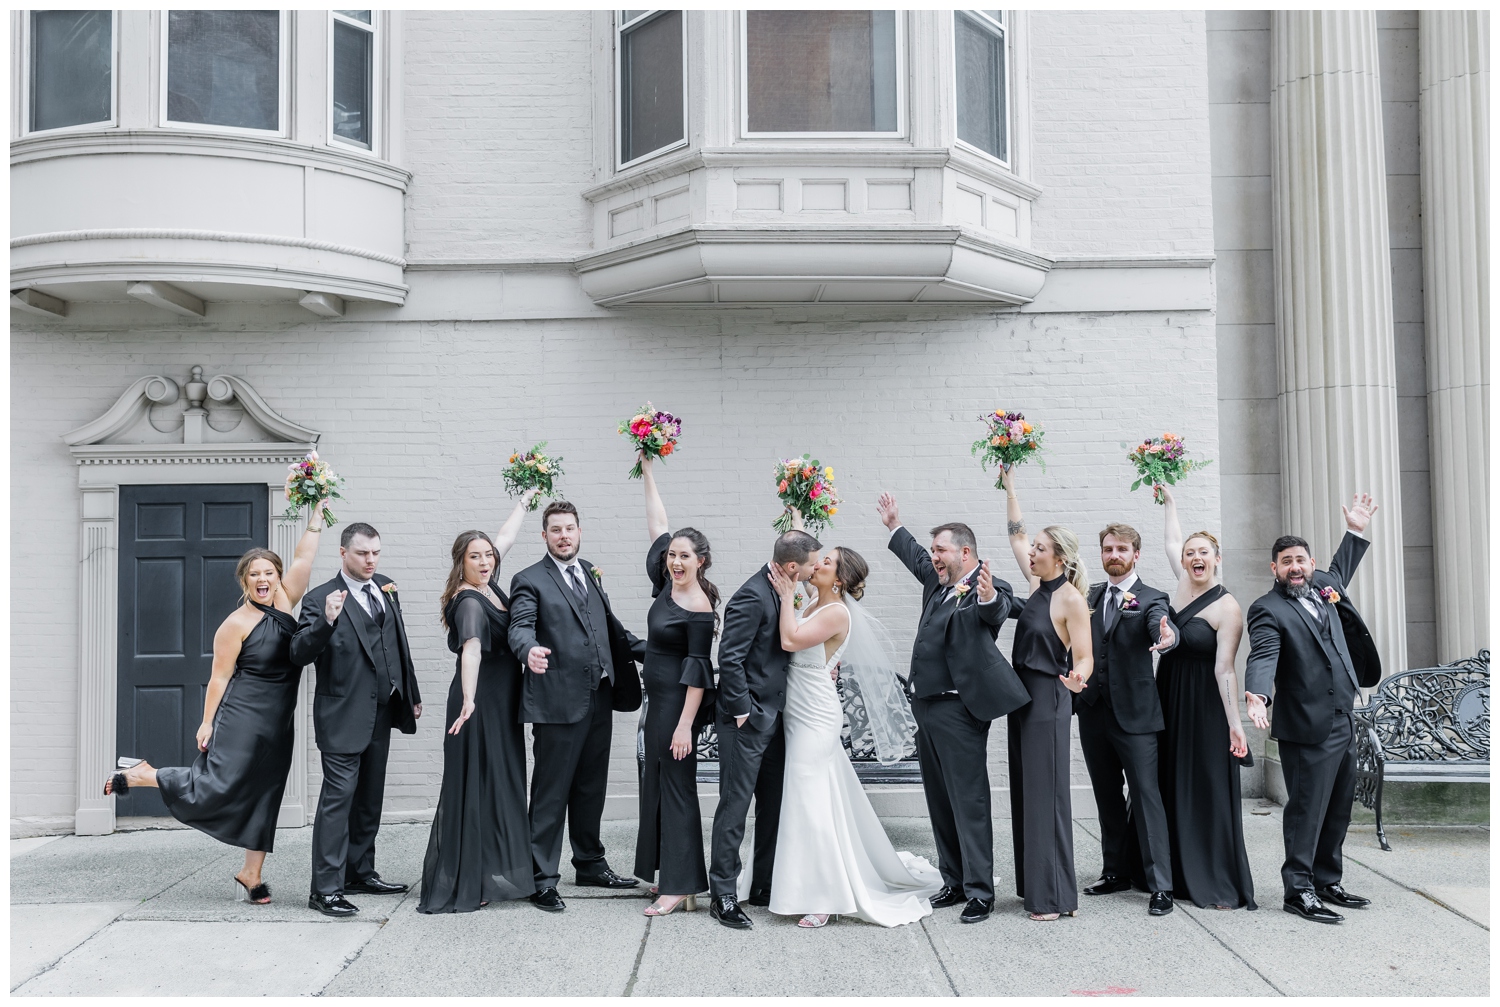 Bridal party all in black with with bright colorful bouquets cheering for the bride and groom as the newlyweds kiss in front go the Franklin Plaza Ballroom in Troy, NY.